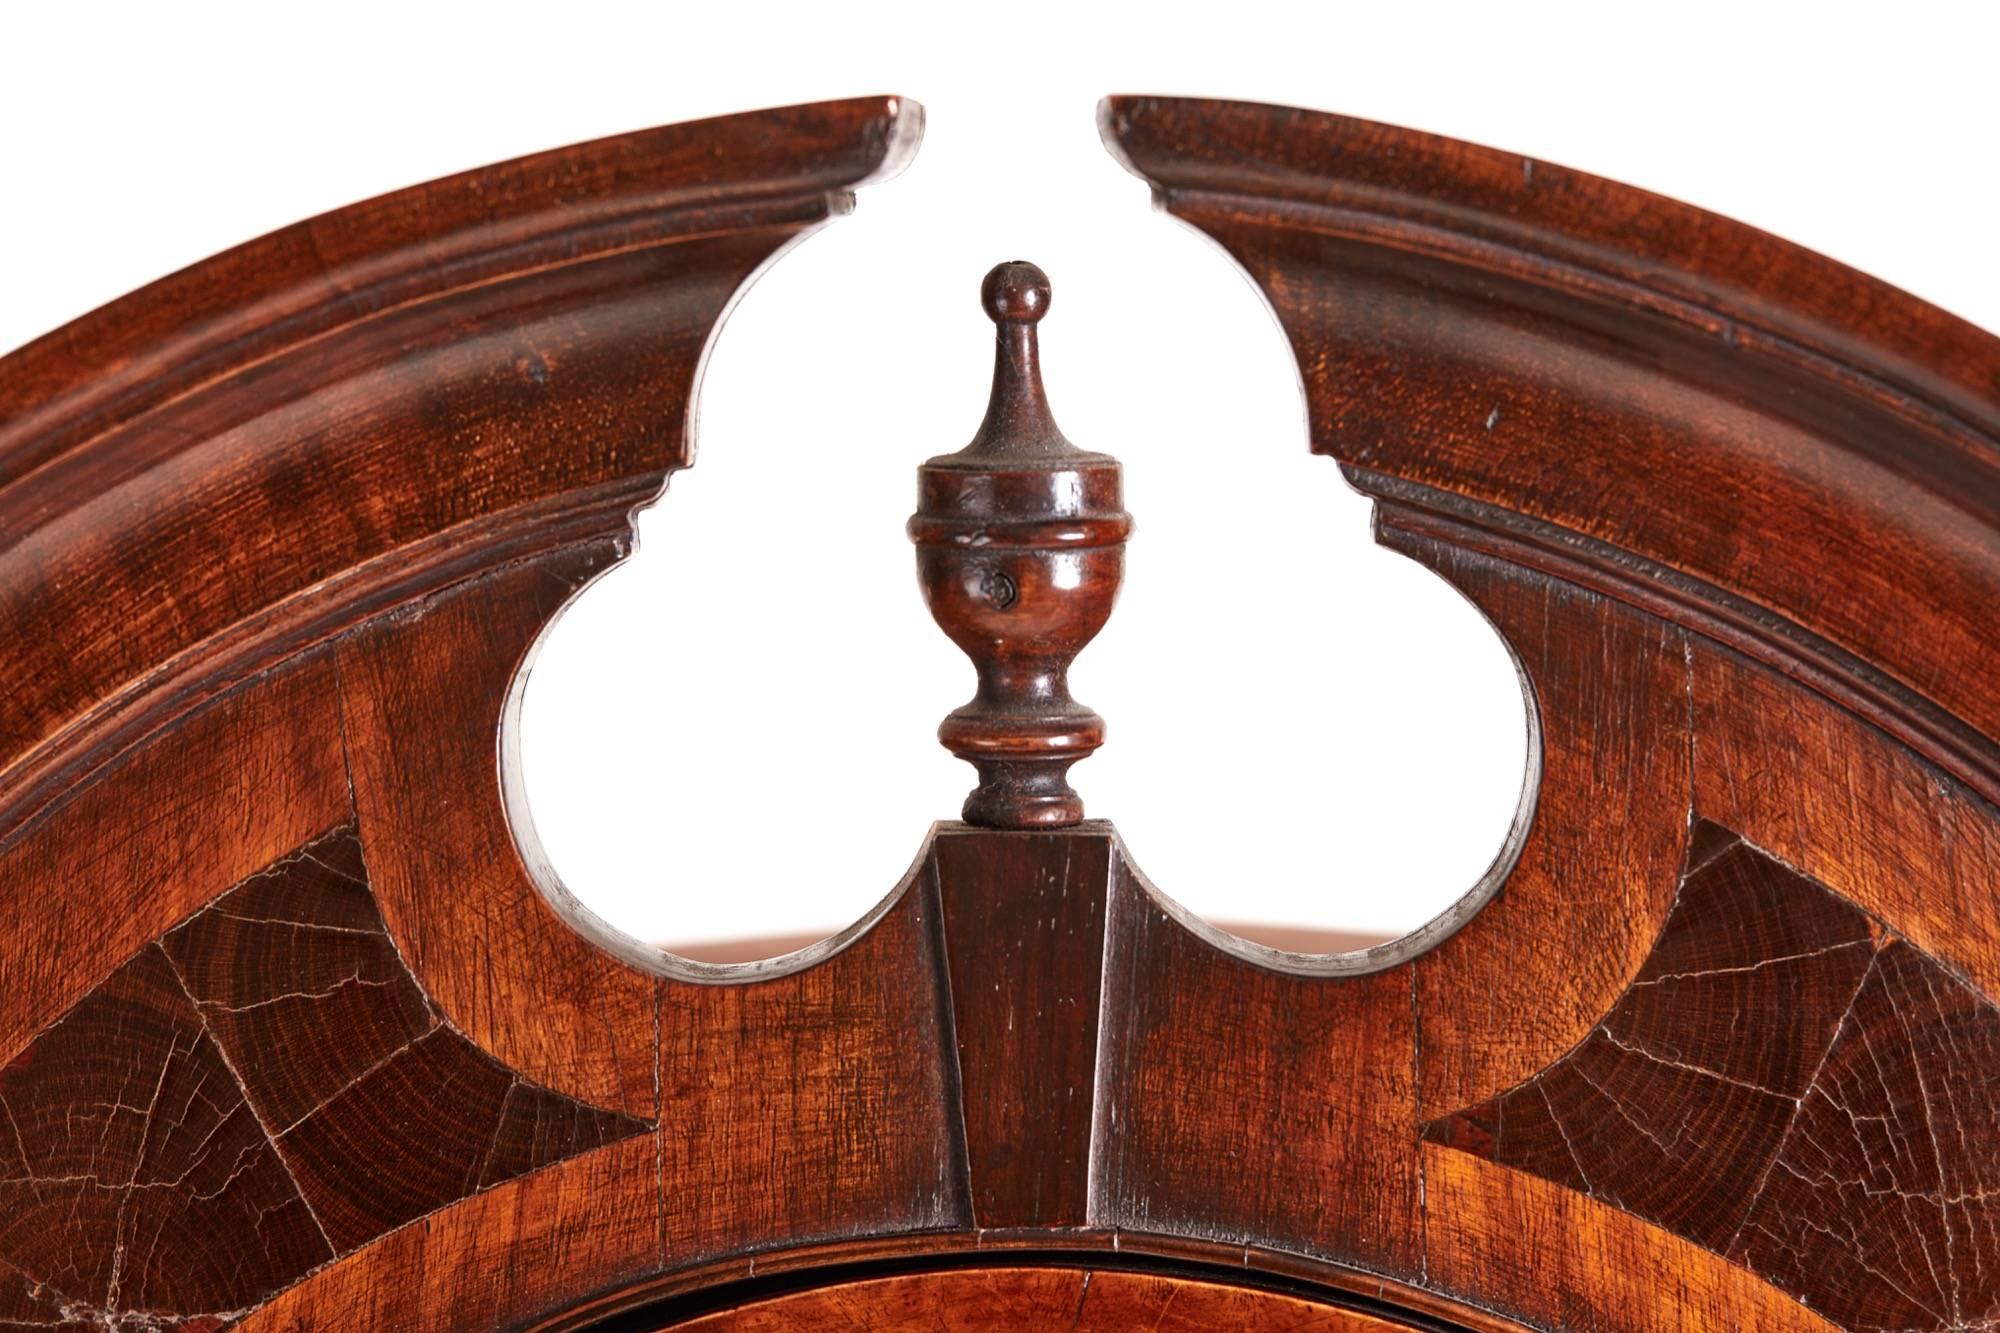 Queen Anne style burr walnut and oyster wood corner cabinet, with a shaped moulded pediment and oyster wood inlay, turned finial to the centre, single astral glazed door, the interior with two shelves, the base having a single door inlaid with